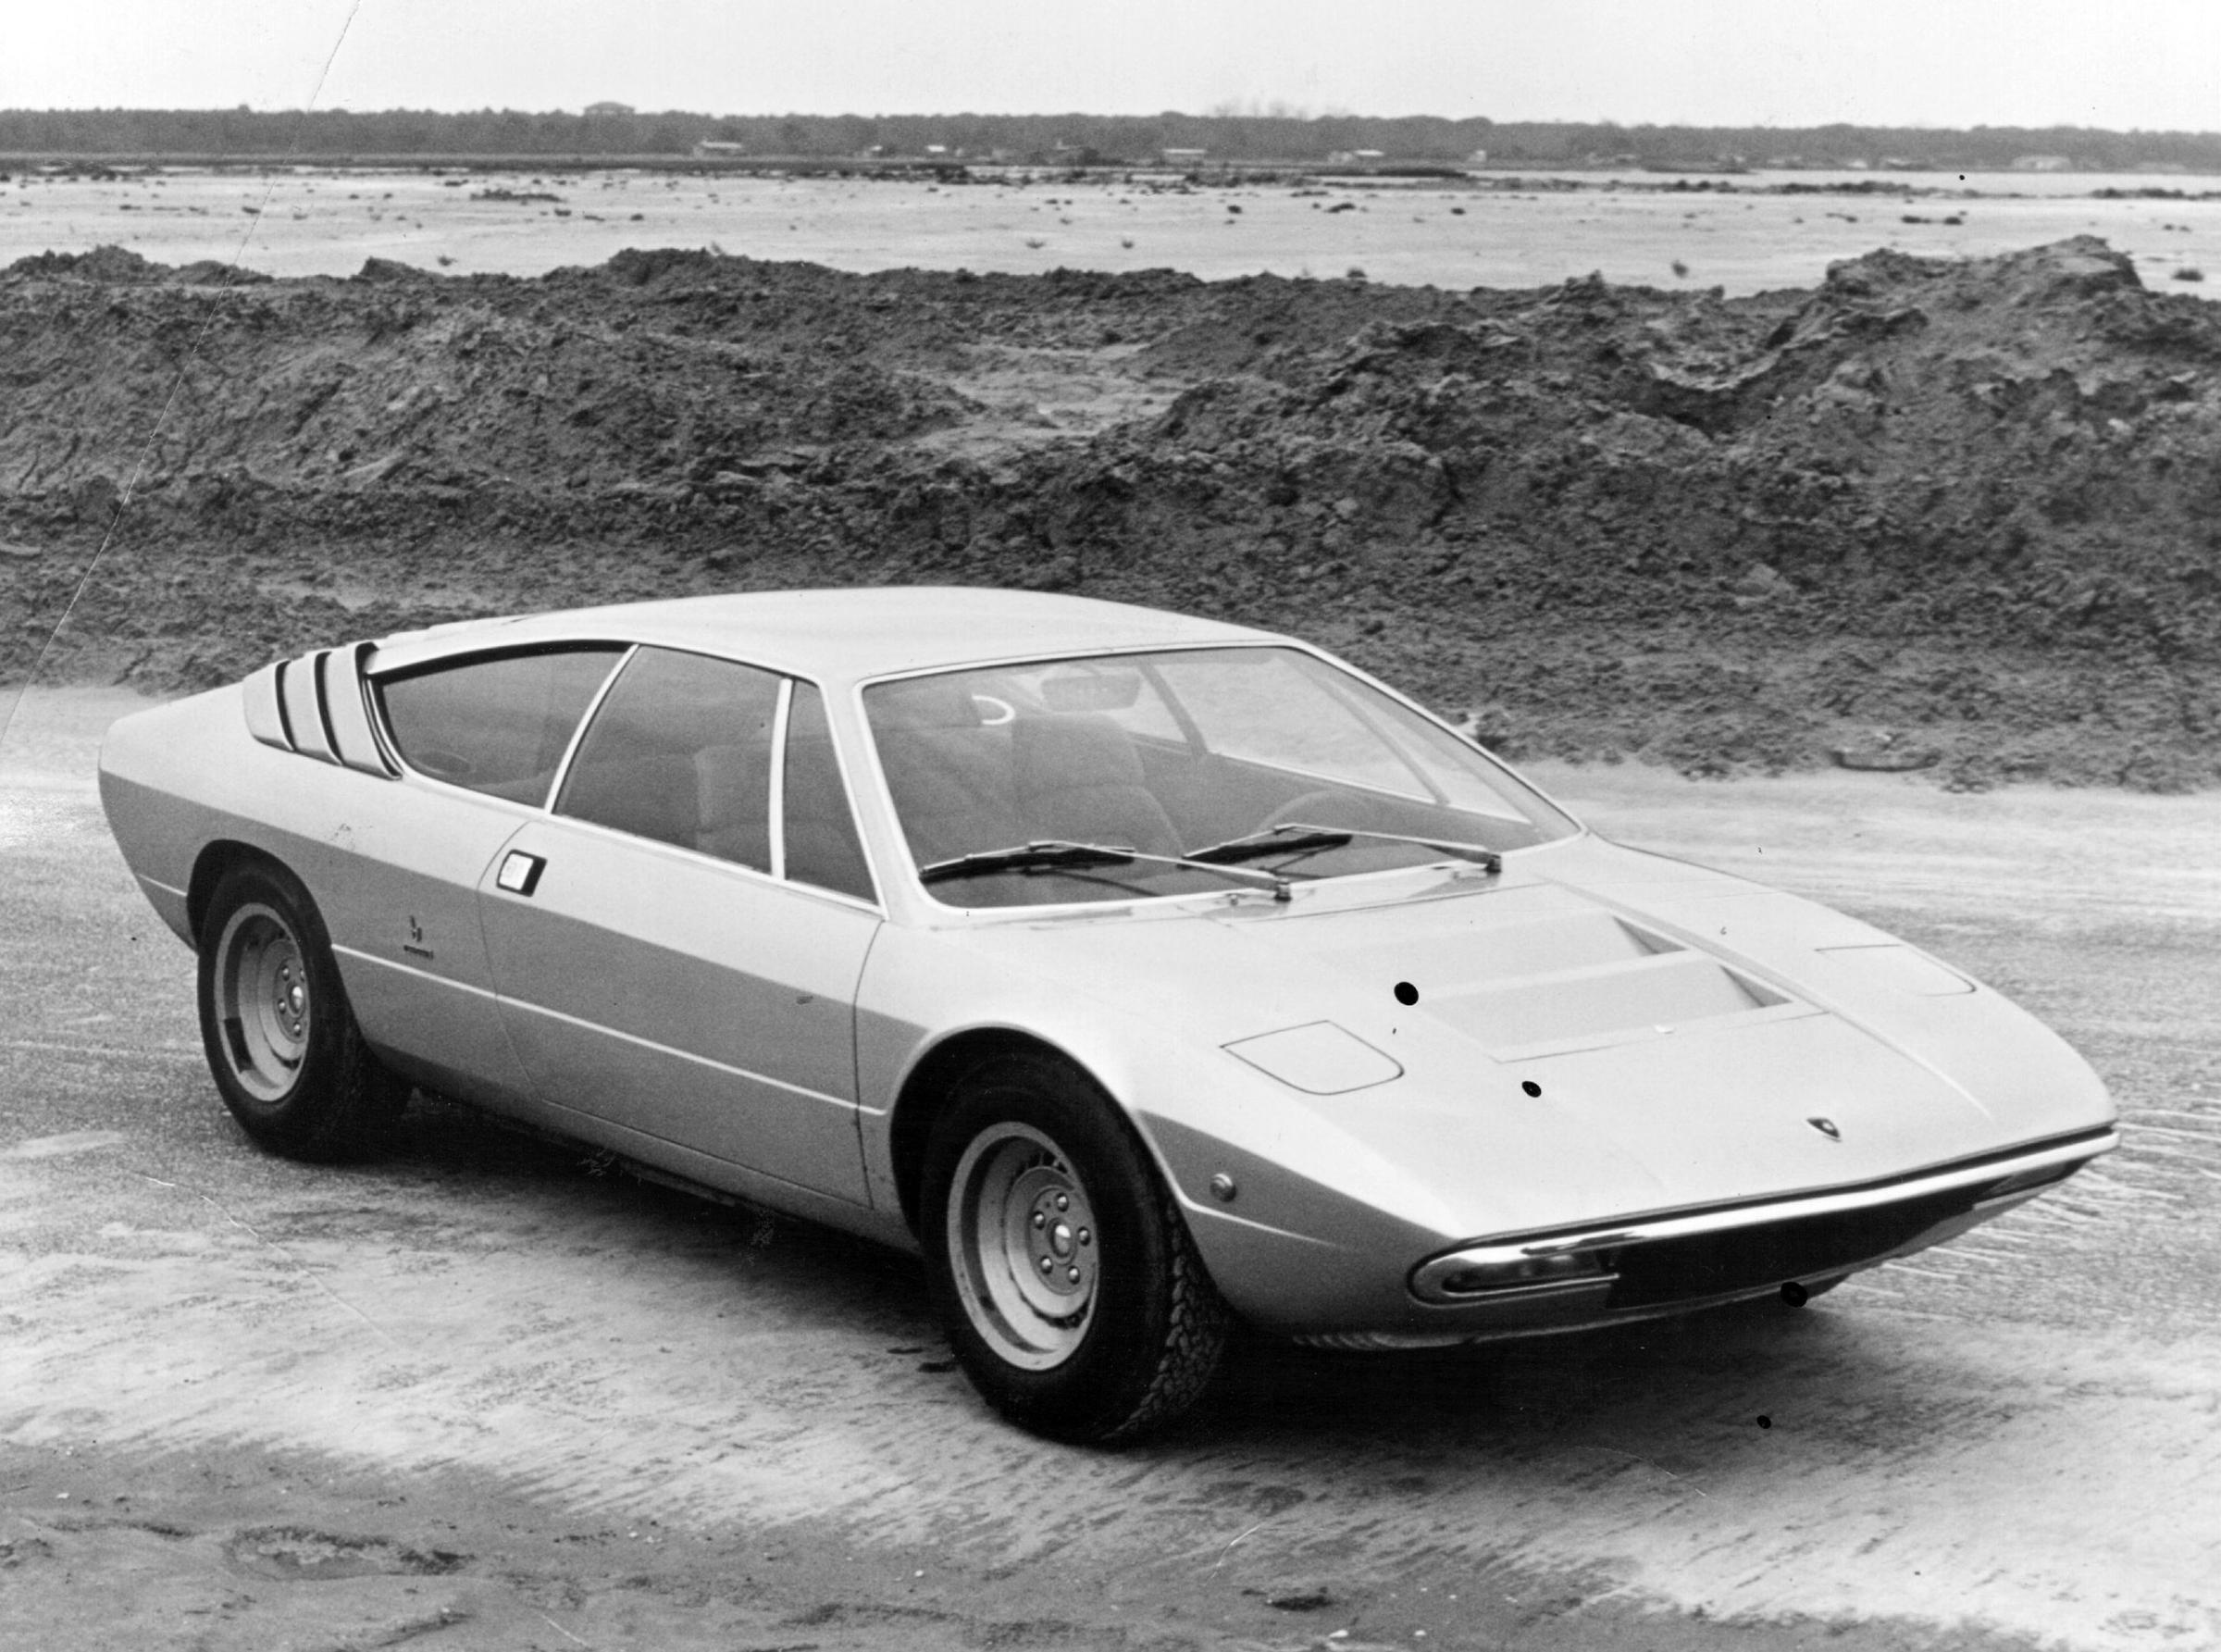 Lamborghini P250 Urraco 2+2 V8 sports car styled by Bertone and priced at £5500 in 1972.